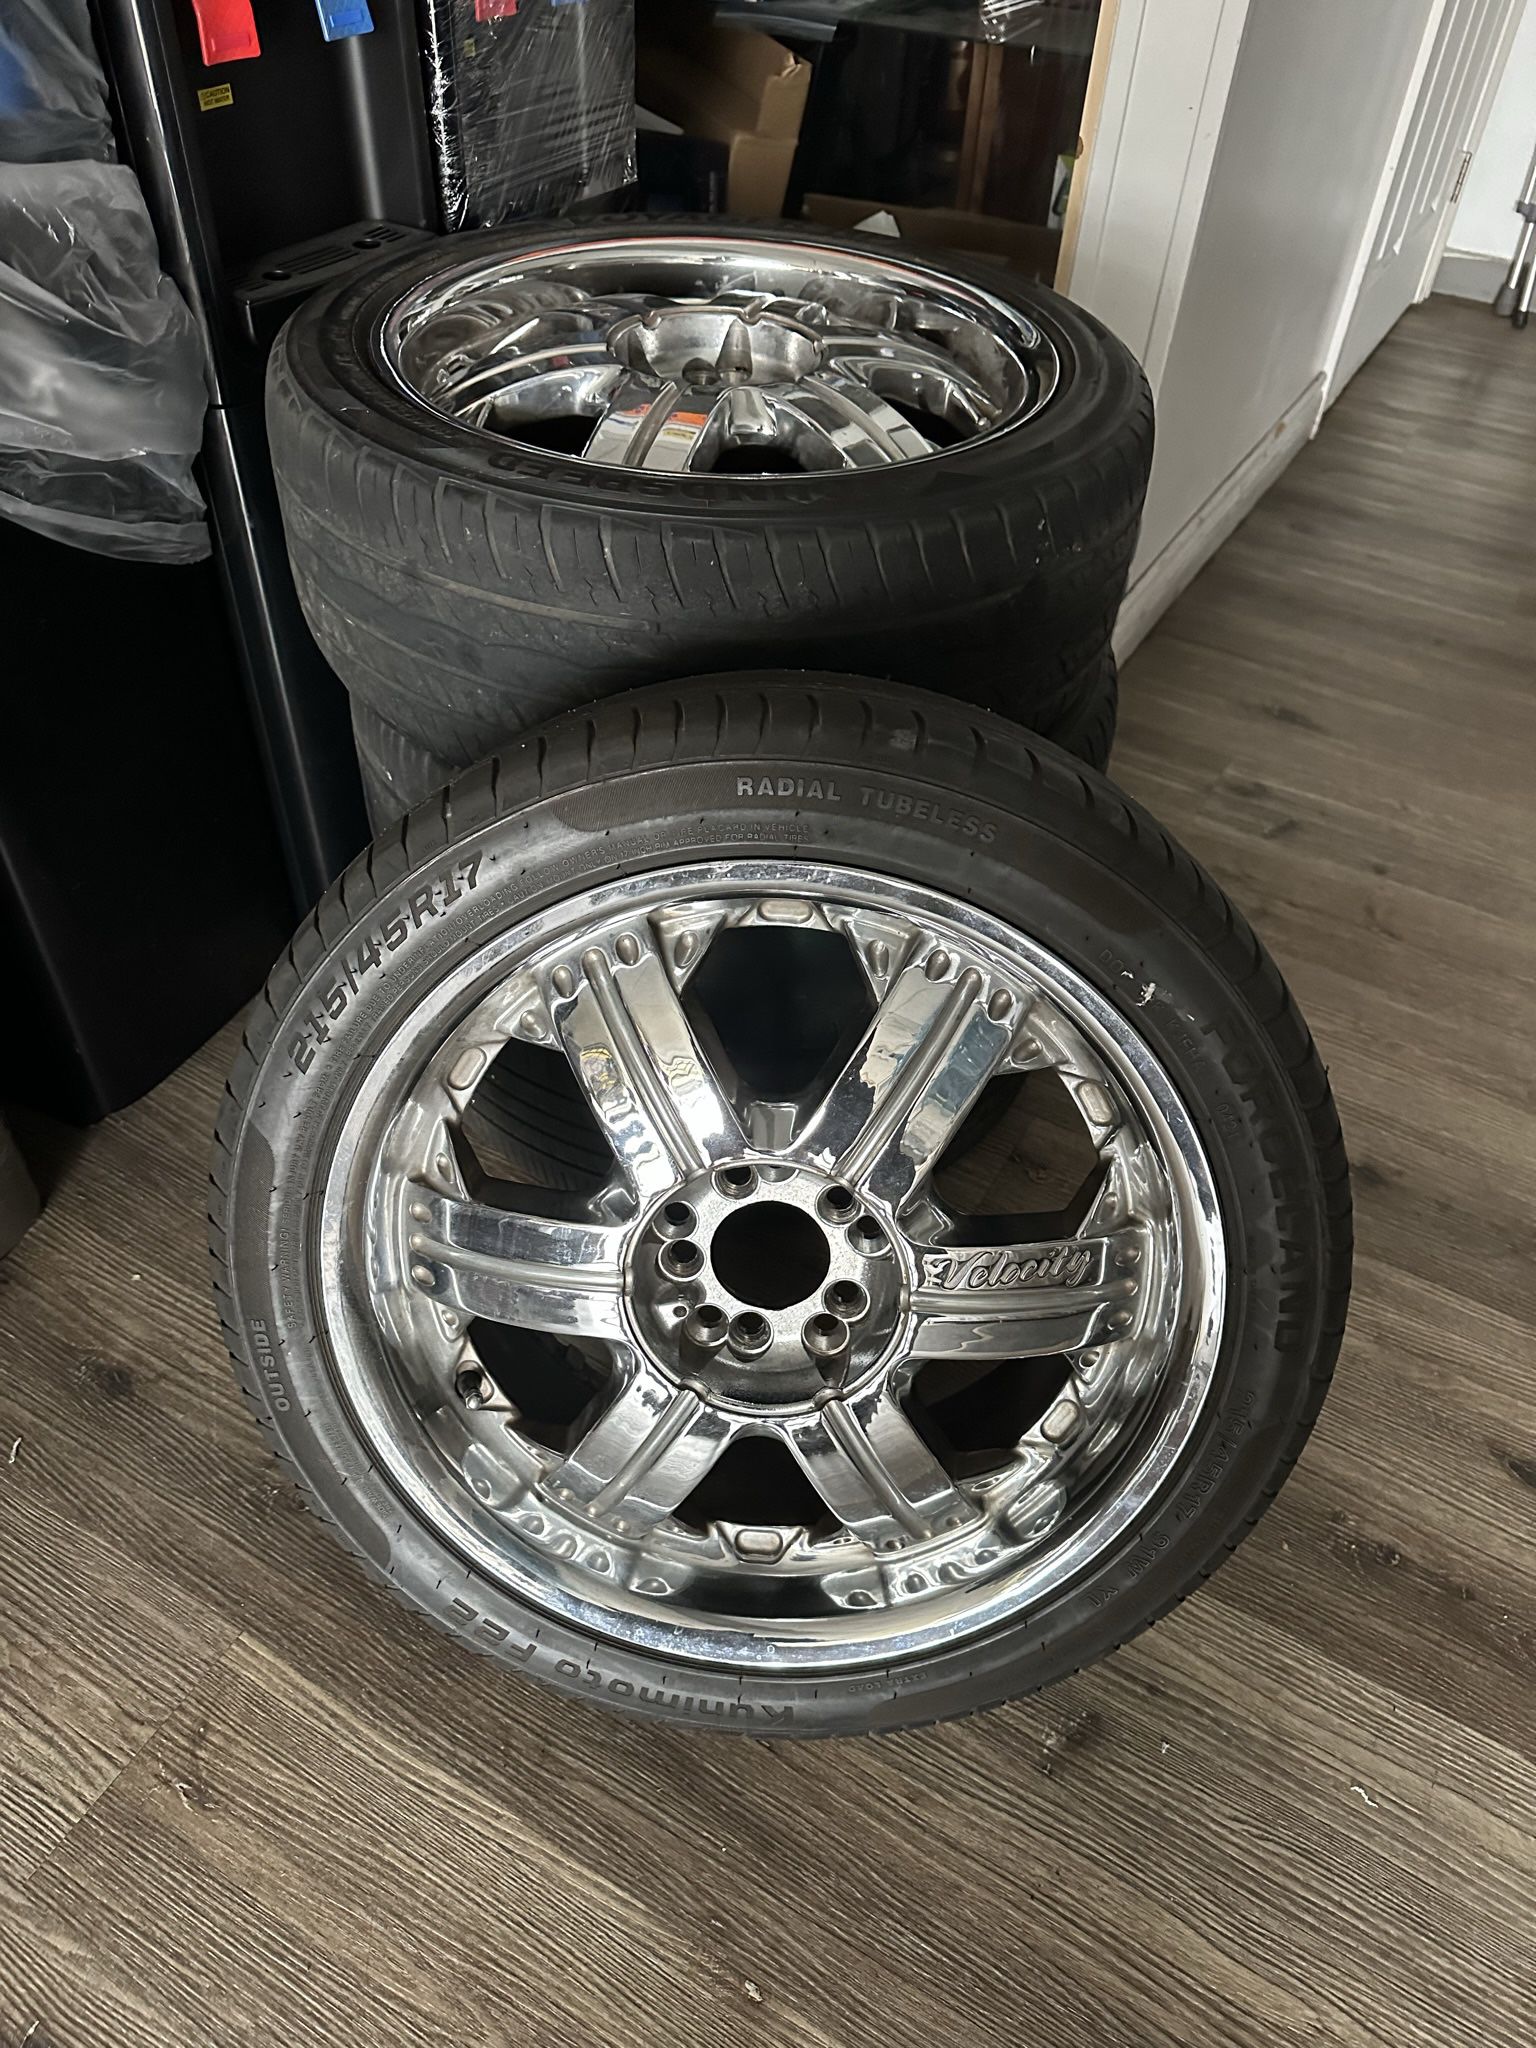 5 Lug Rims for Sale in City Of Industry, CA - OfferUp